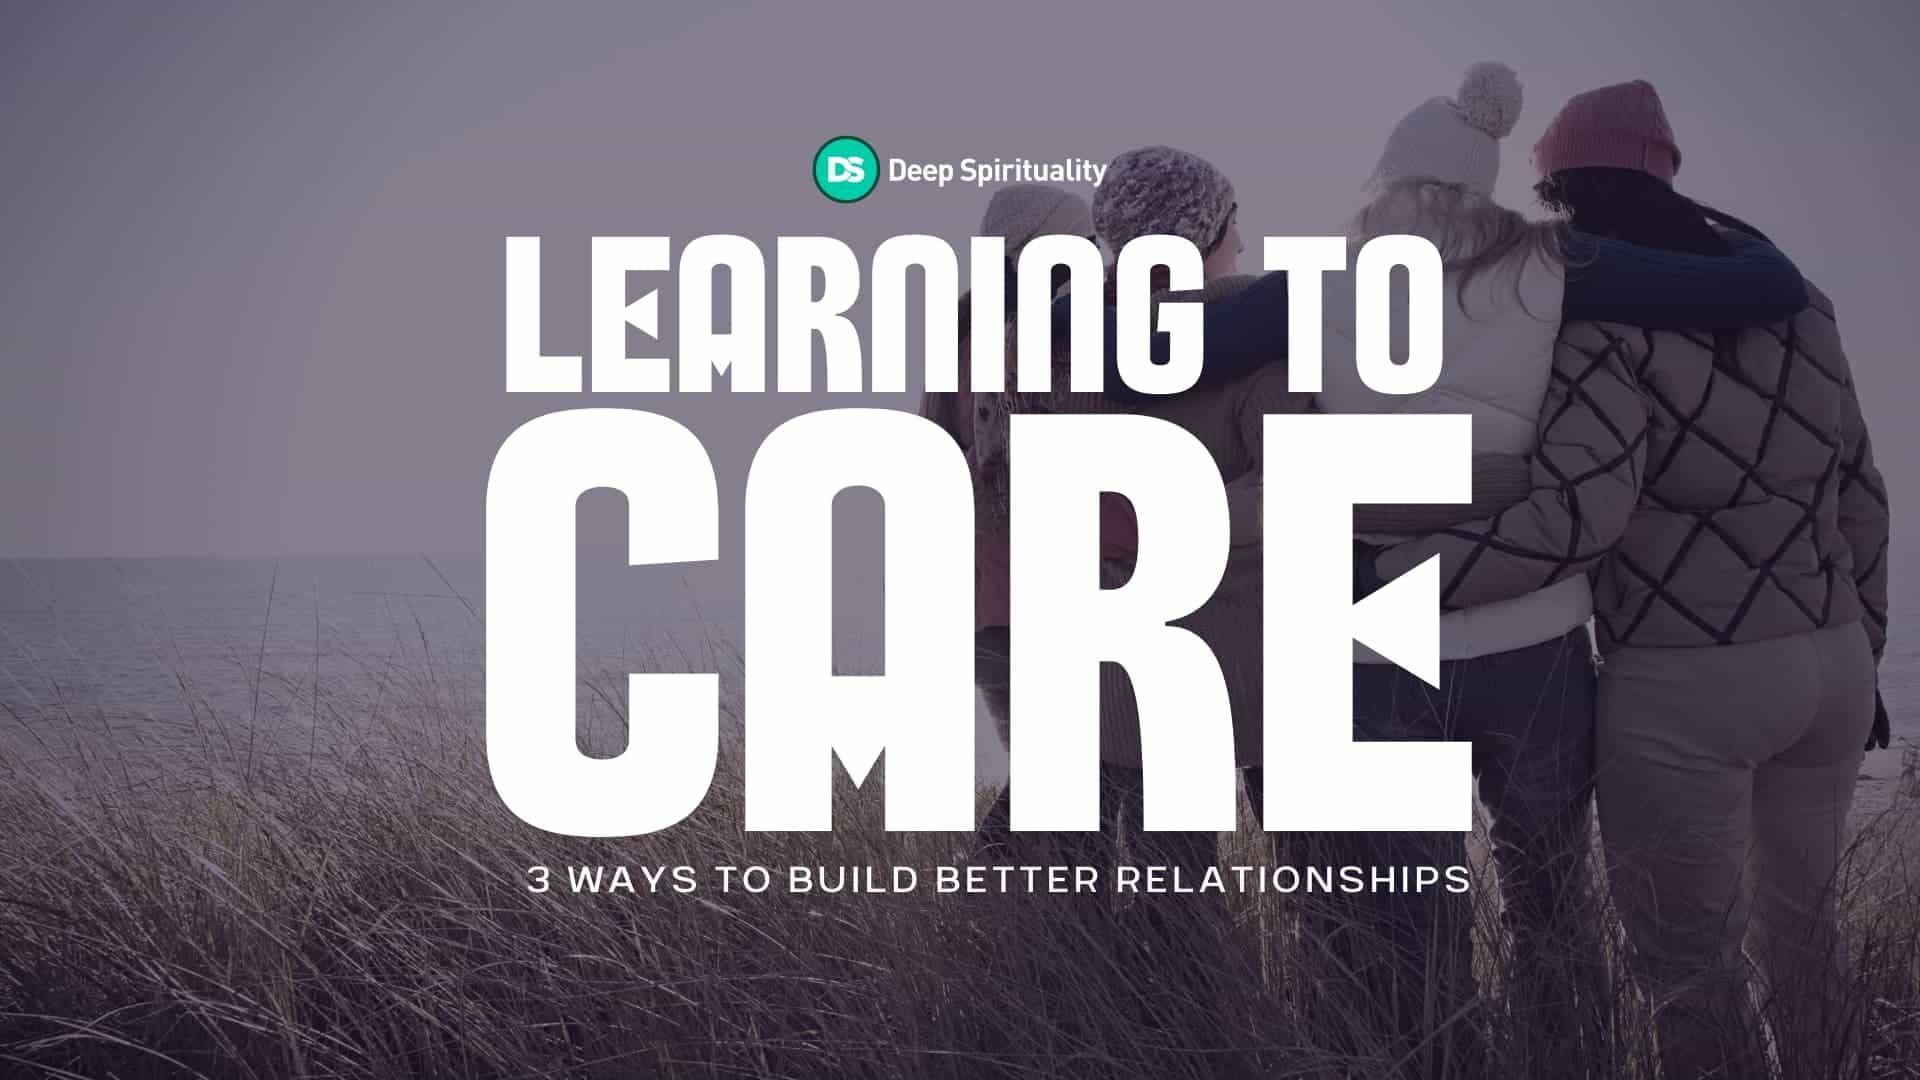 Learning to Care: 3 Ways to Build Better, More Compassionate Relationships 7